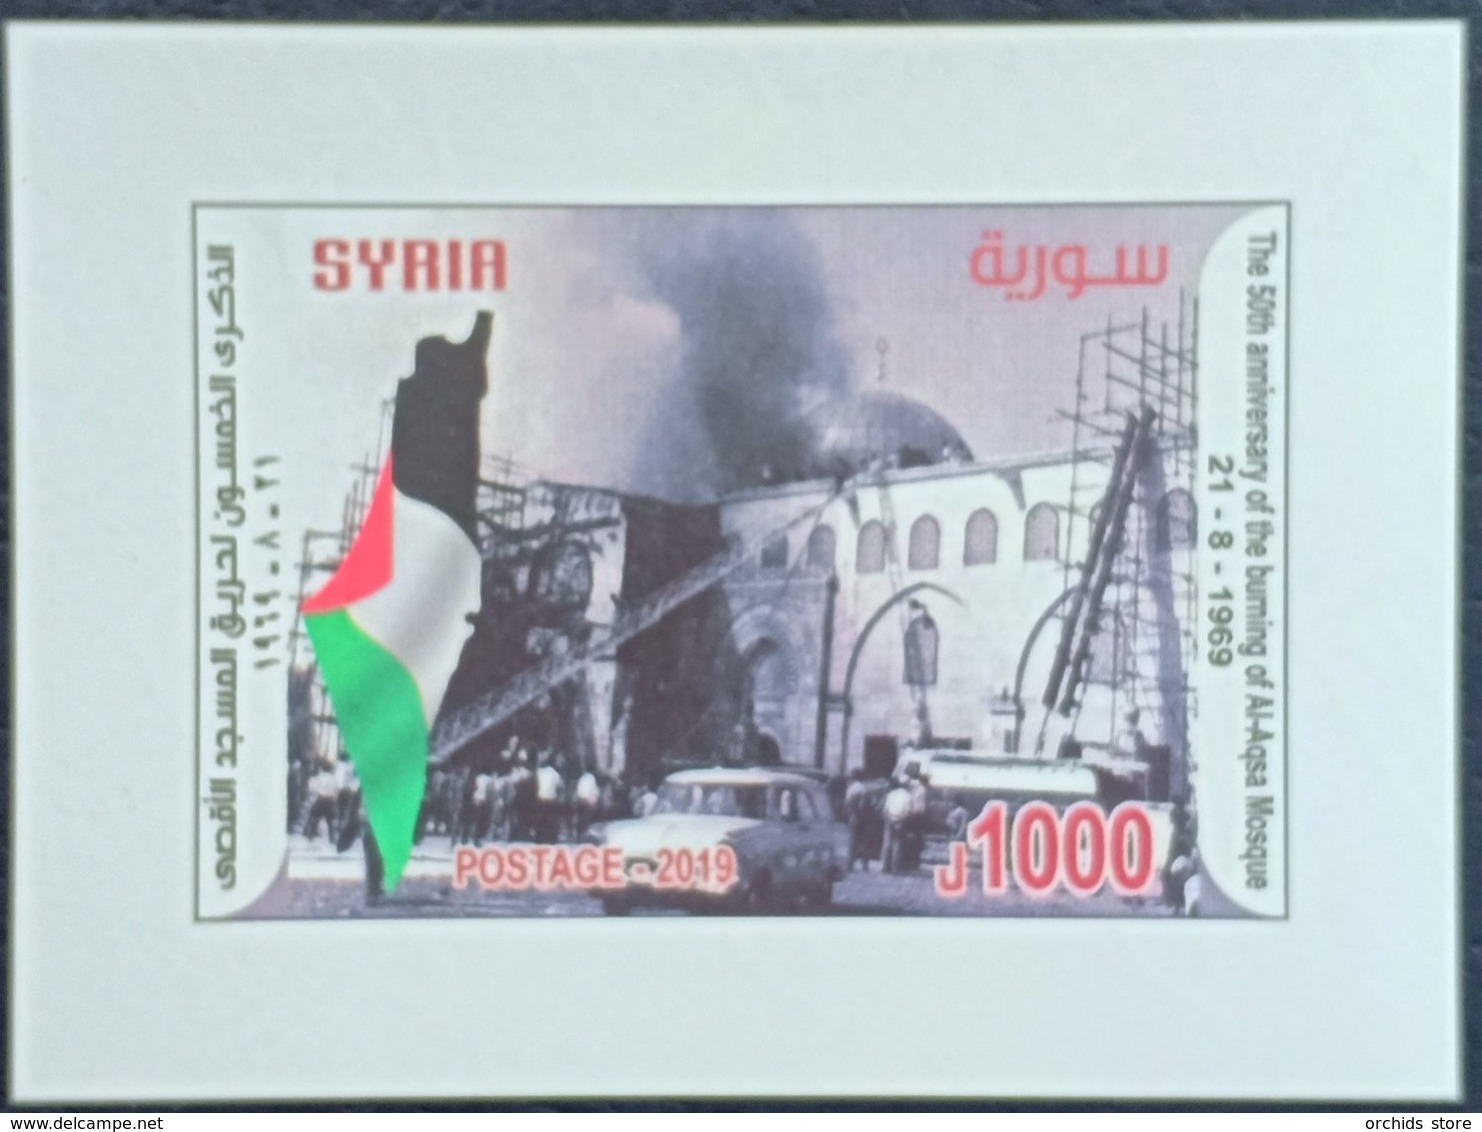 Syria 2019 NEW MNH Block S/S - Al-Quds Jerusalem 50th Anniv Of The Burning Of Al-Aqsa Mosque - Only 1000 Issued - Syrië